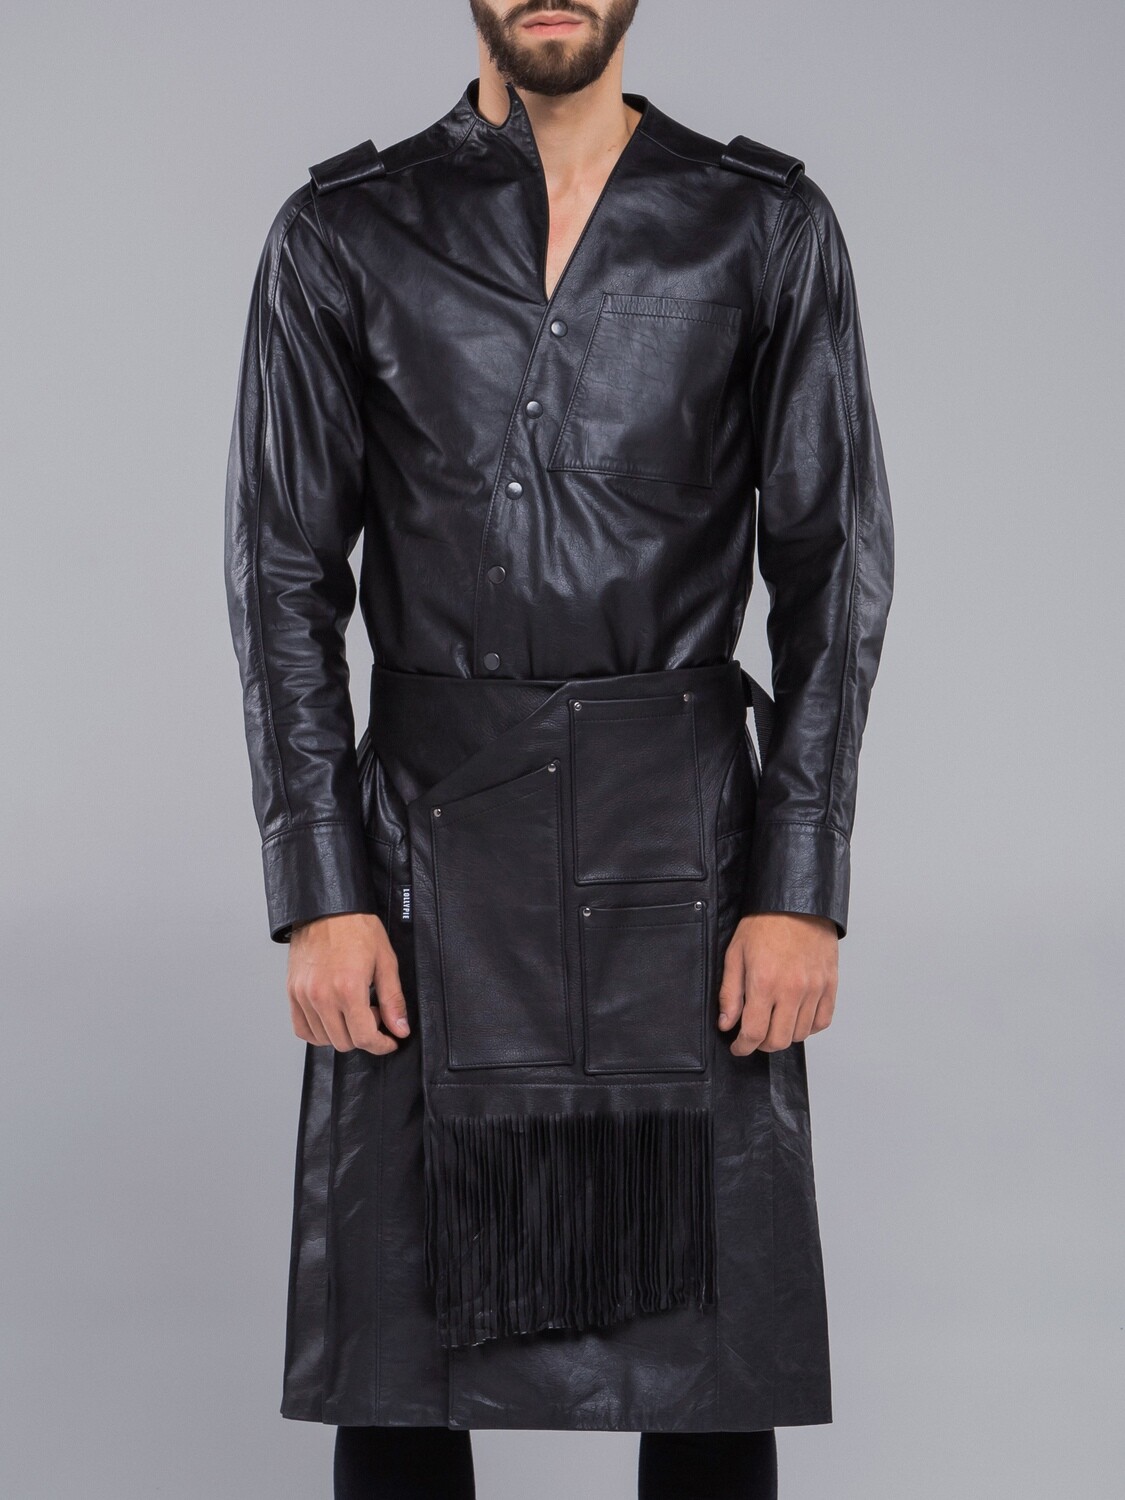 Lollypie Leather Man Dress